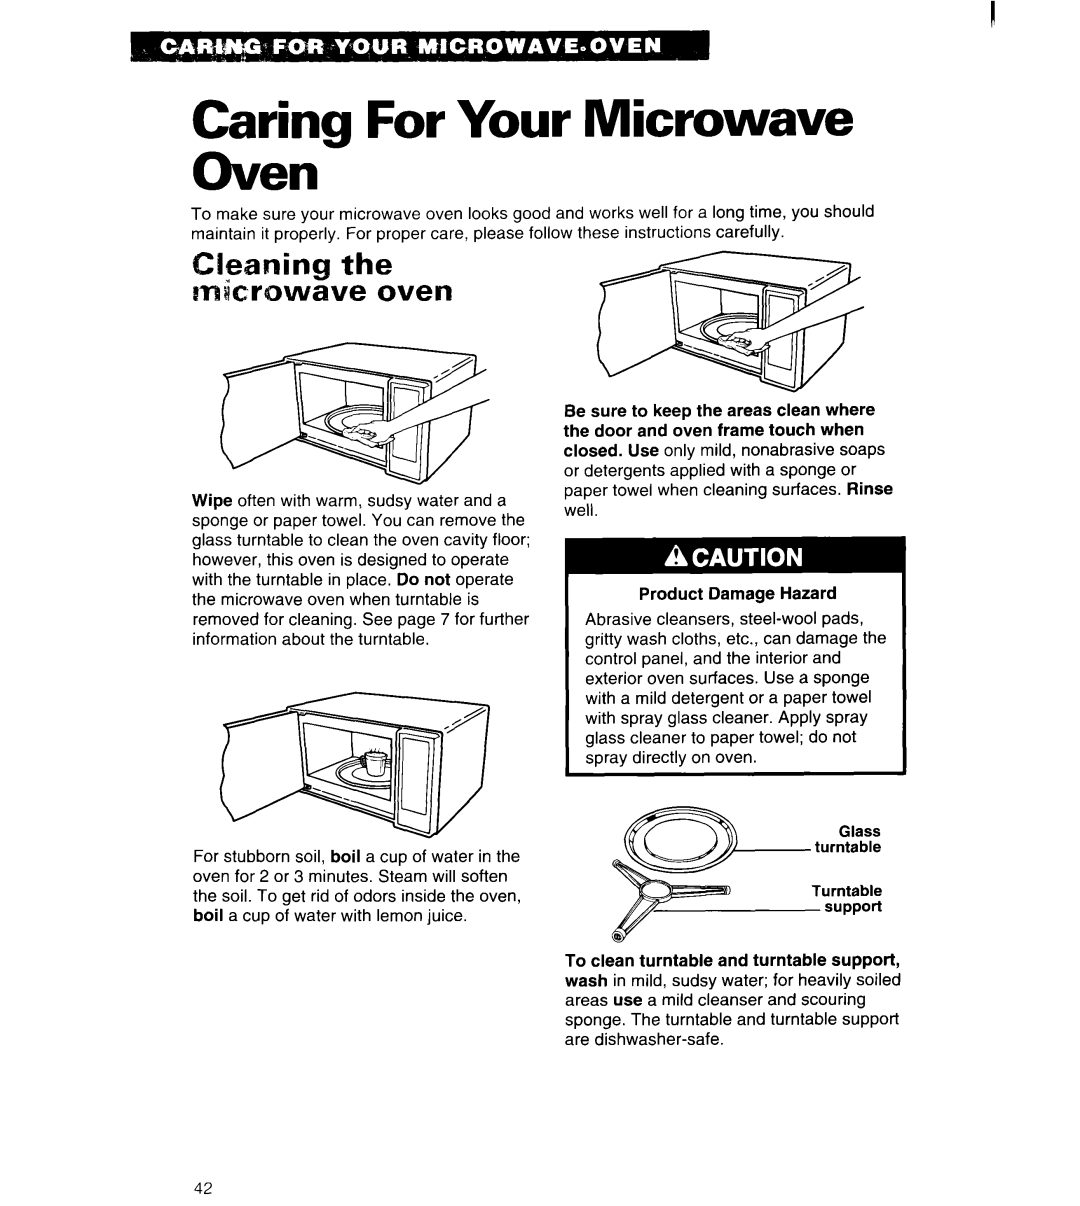 Whirlpool MT6120XBQ, MT6120XBB installation instructions Caring For Your Microwave Oven, Gleaming the amkrrwave oven 